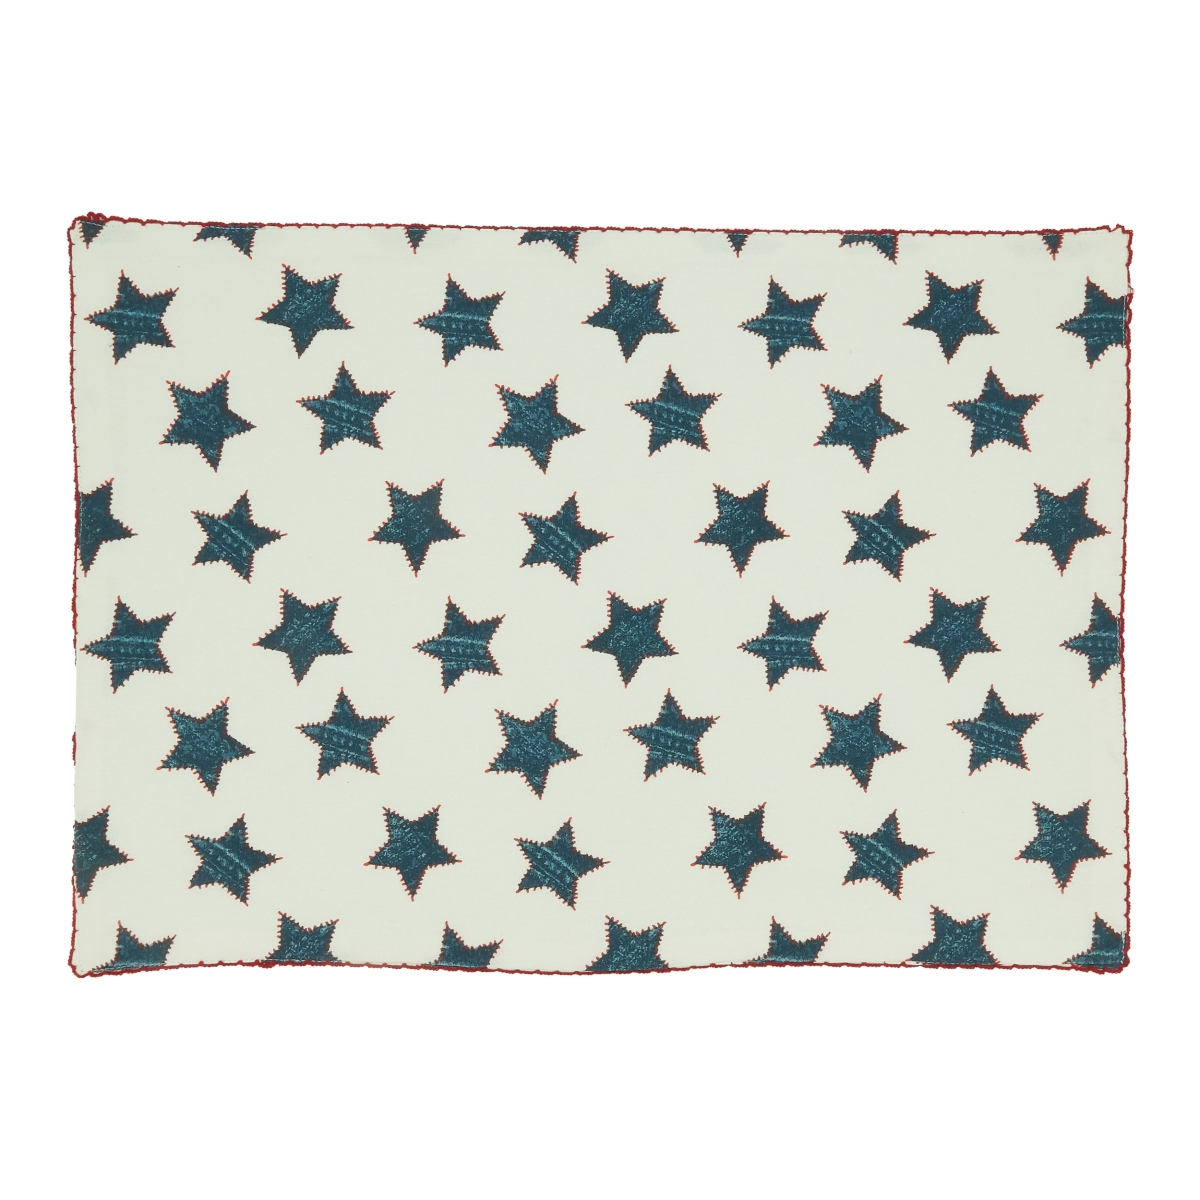 14 x 20 in. Whipstitch Stars Oblong Table Placemats, Multi Color - Set of 4 -  CookHouse, CO3202256